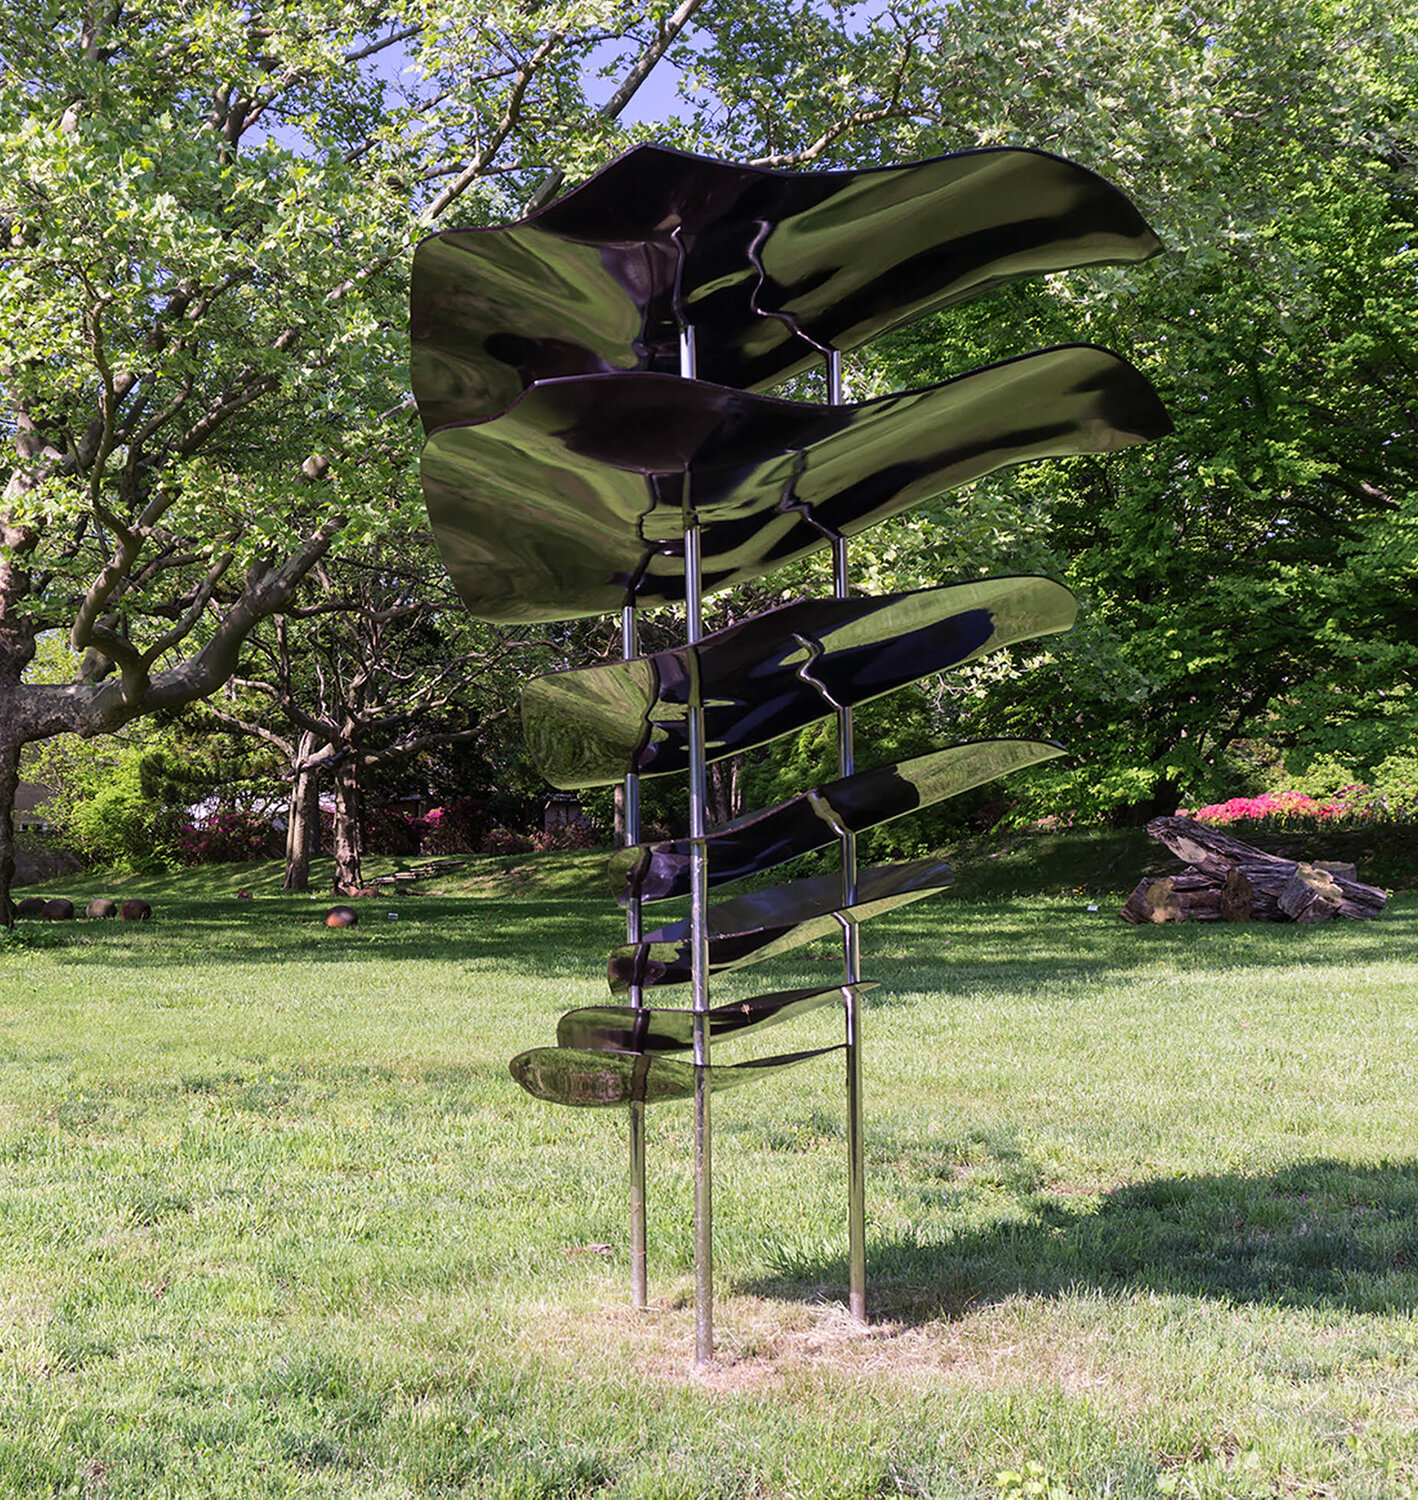 The scuplture “untitled (2nd Tier)” by Bernard Klevickas is on display at the Art Garden.